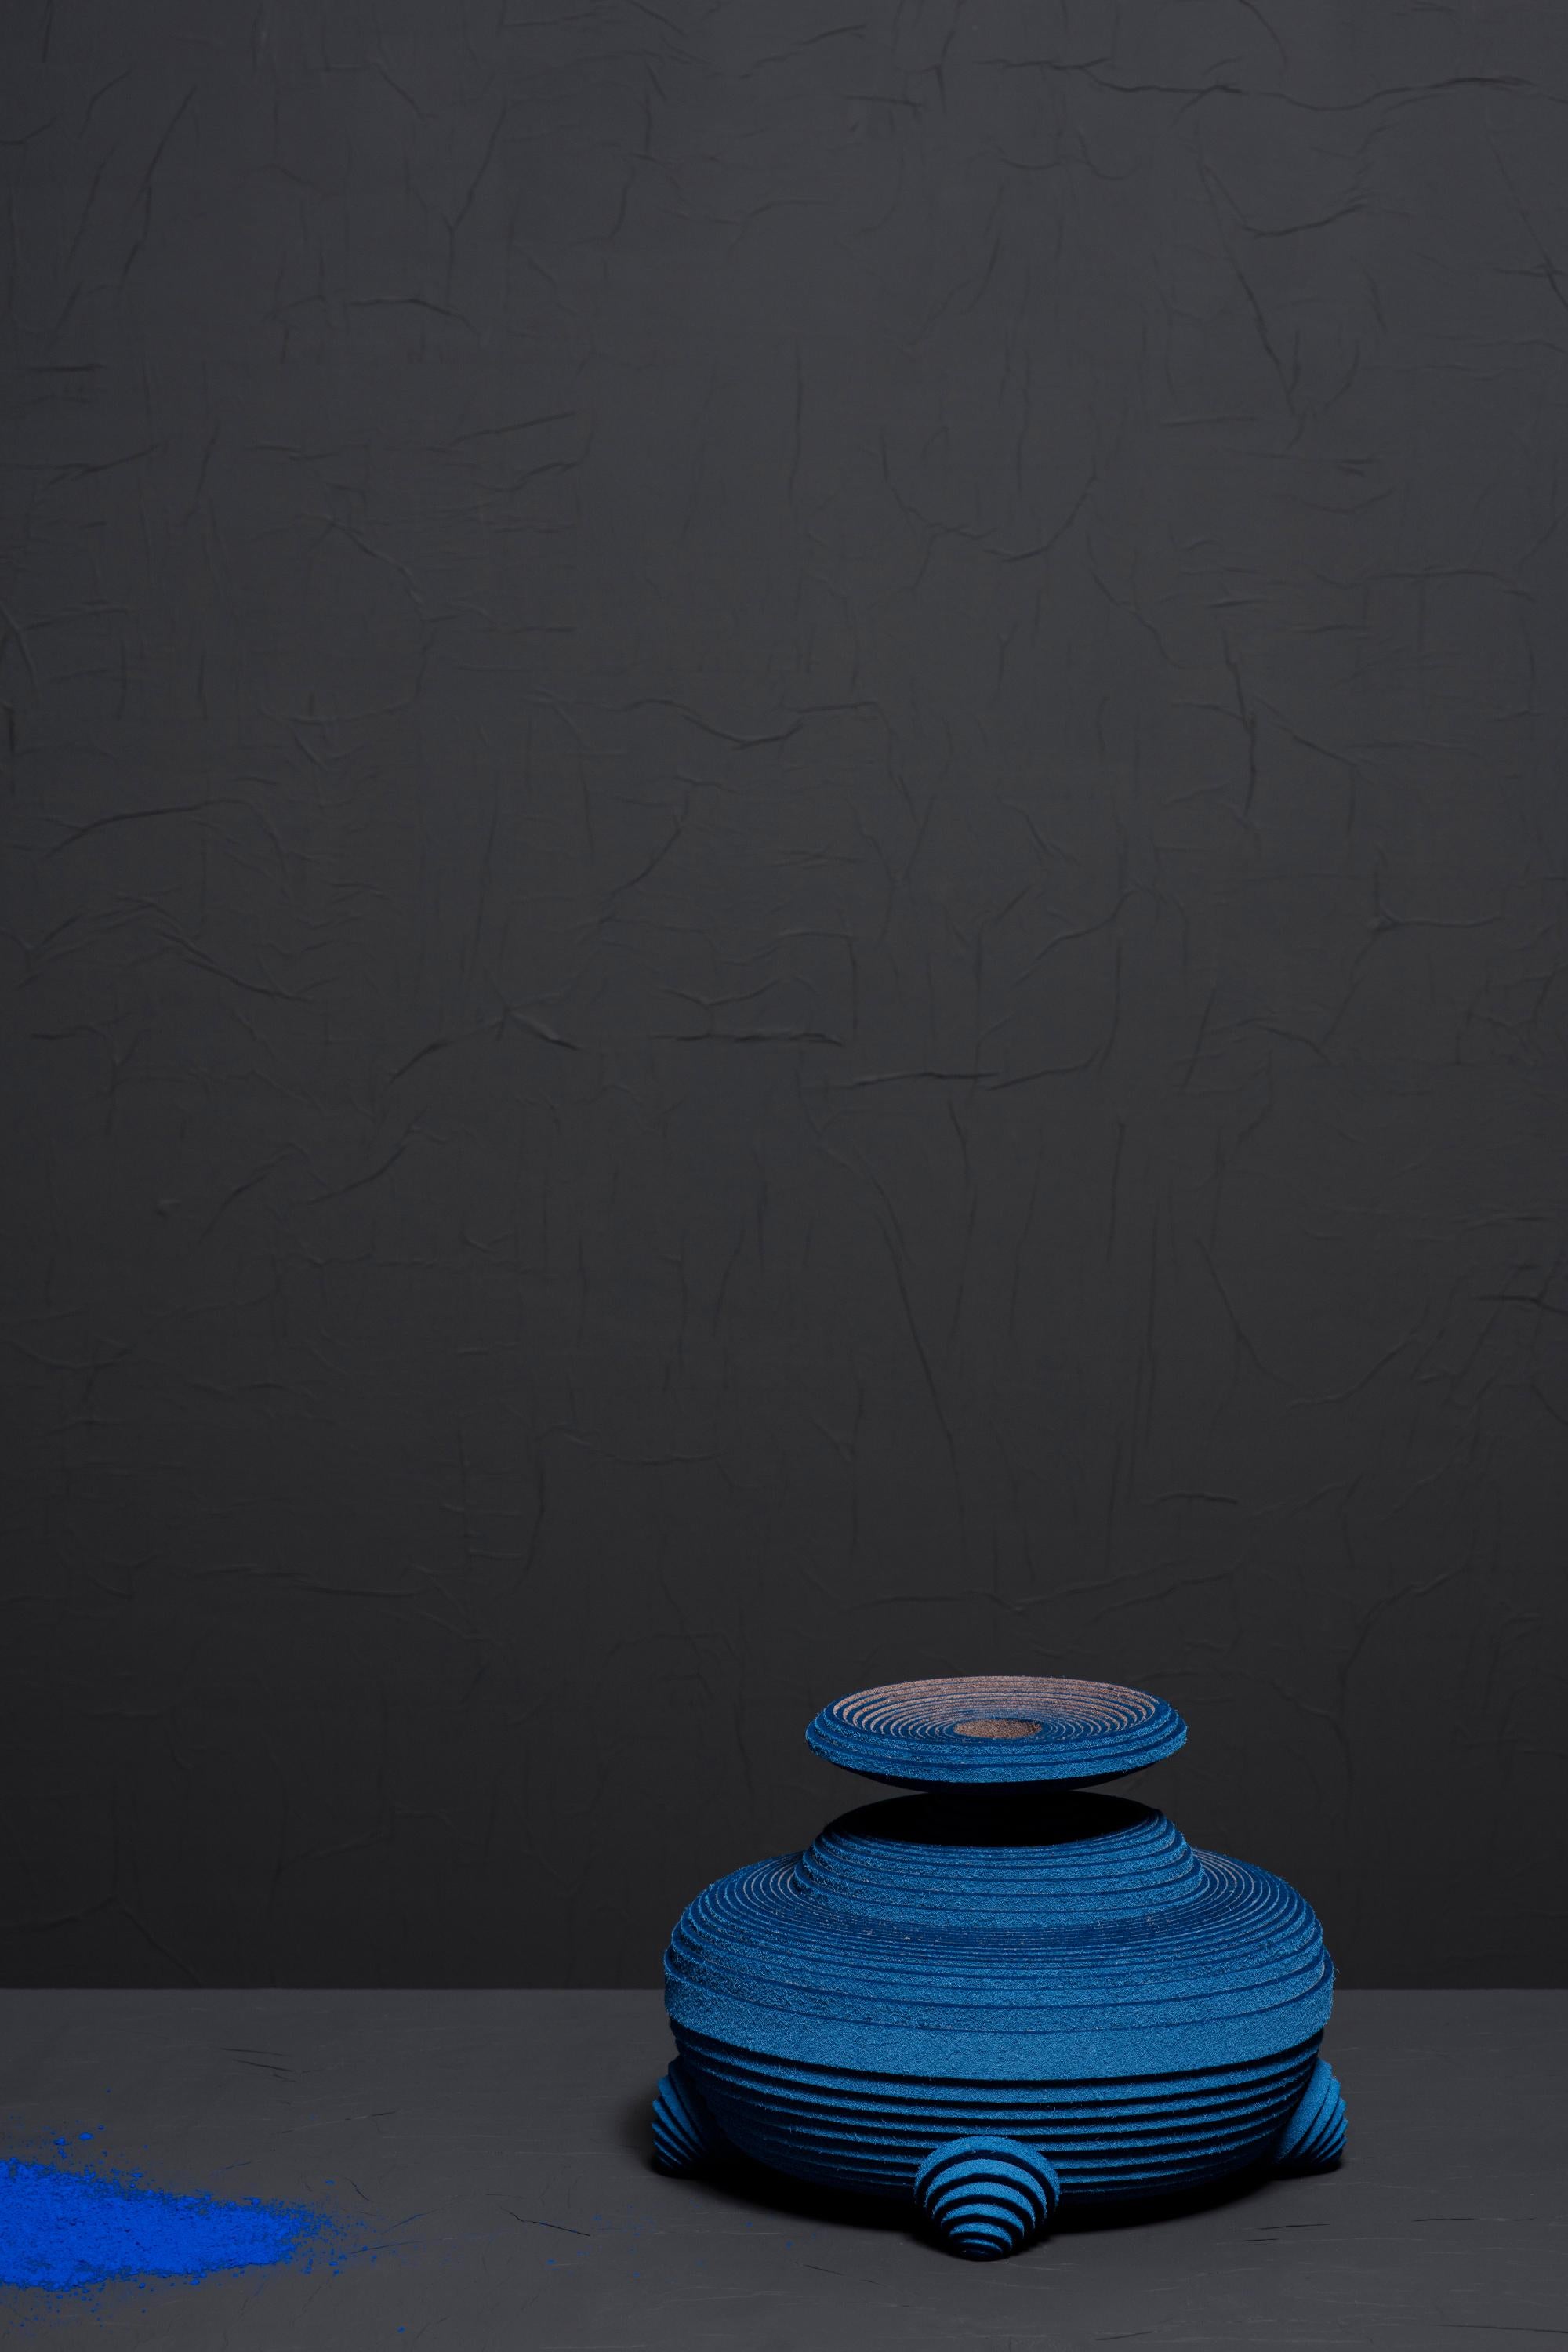 Blue Alchemy vase by Siba Sahabi
Limited edition of: 36 of each design + 2 AP + 1 P
Vase N.I: 21 x 29 x 29 cm
Signed and numbered.


Referencing the frst man-made pigment that was developed as early as 2600 BCE, Blue Alchemy is the new bright